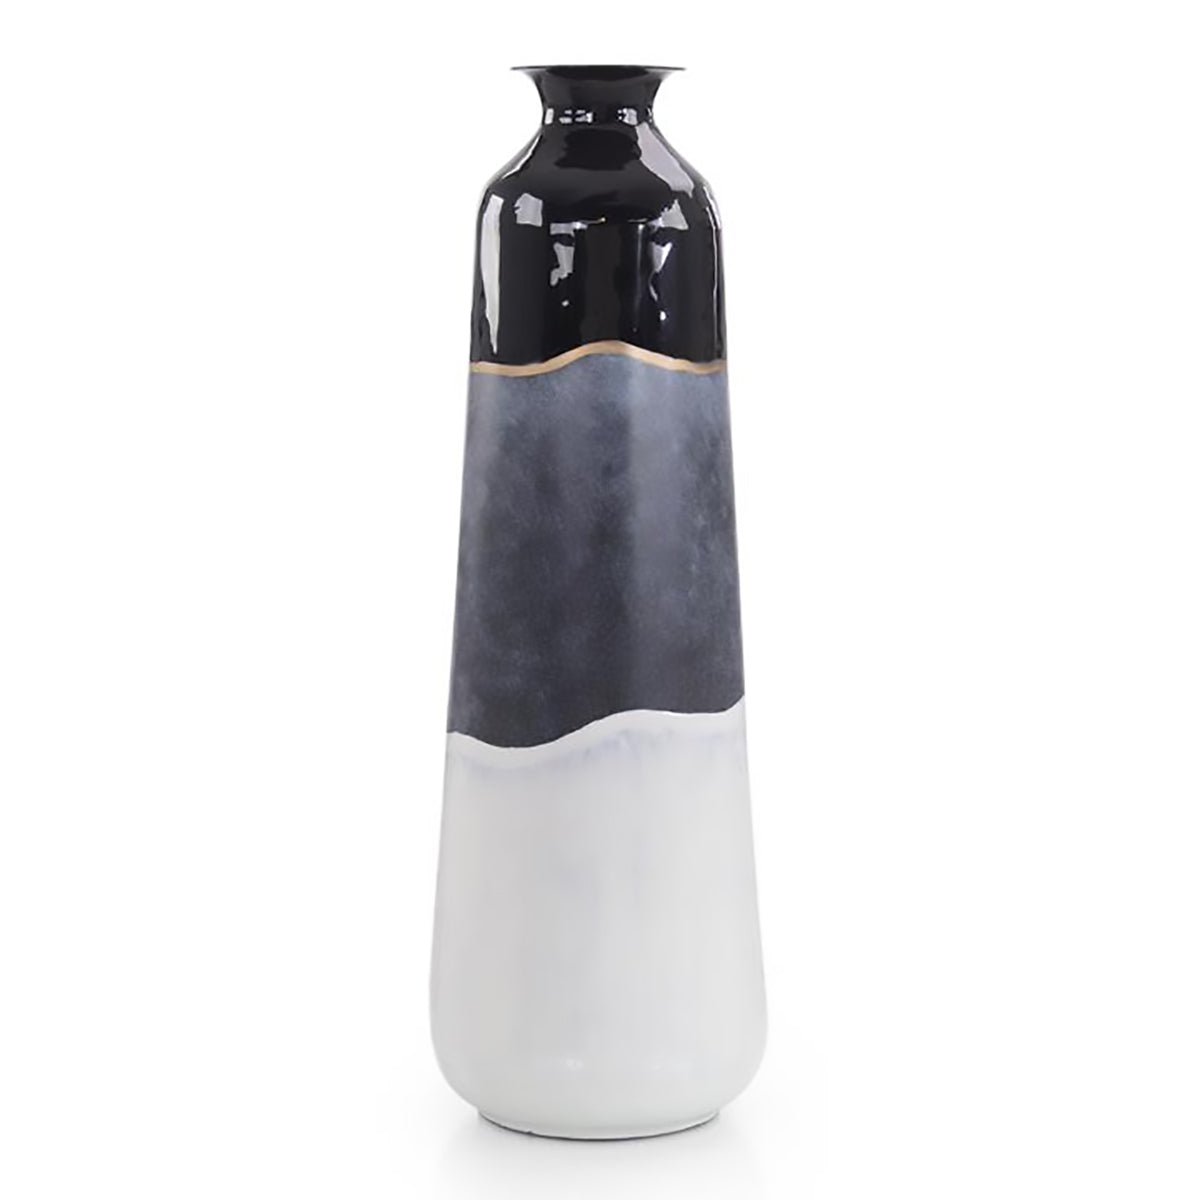 Abstract Black-and-White Iron Vase II